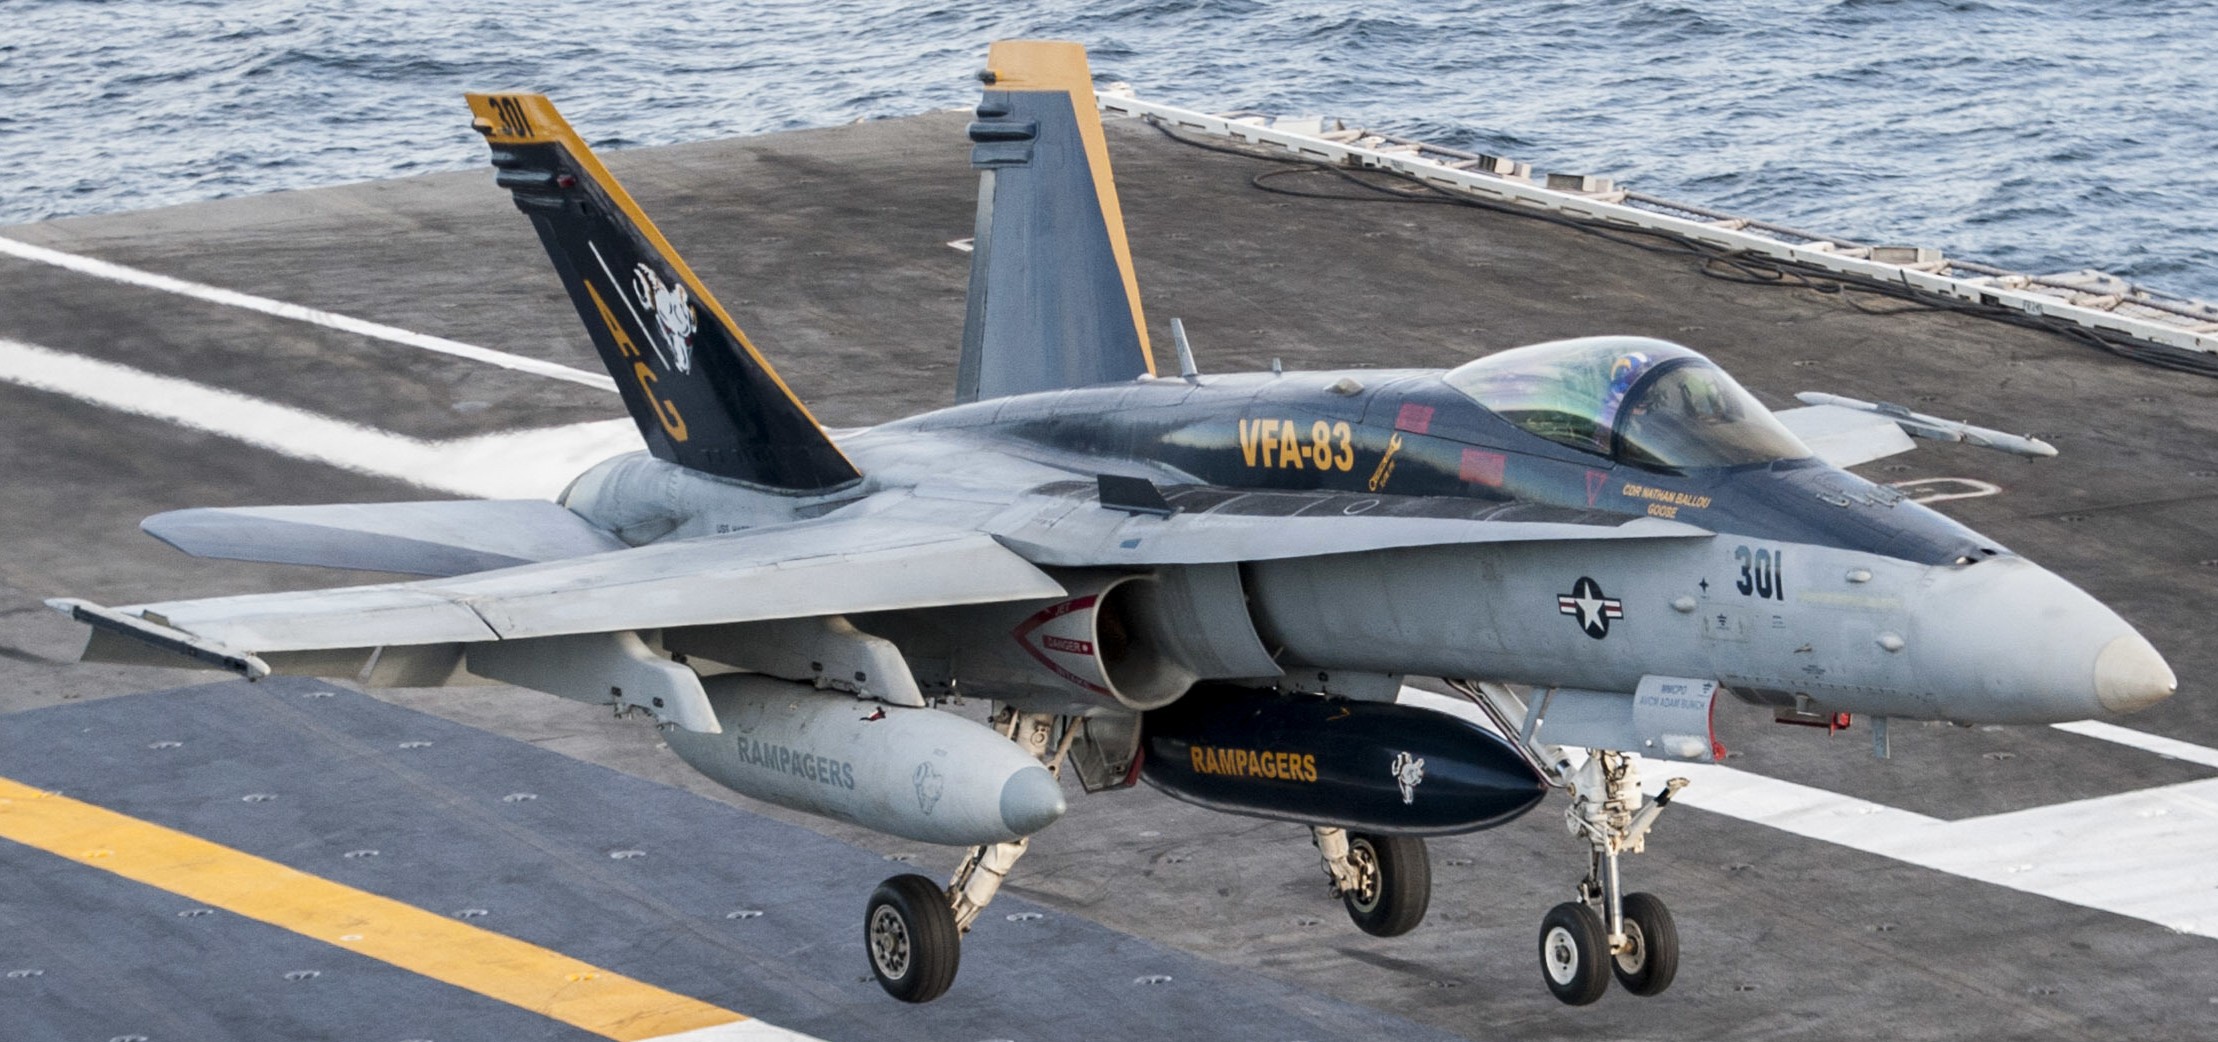 vfa-83 rampagers strike fighter squadron f/a-18c hornet cvw-7 uss harry s. truman cvn-75 34